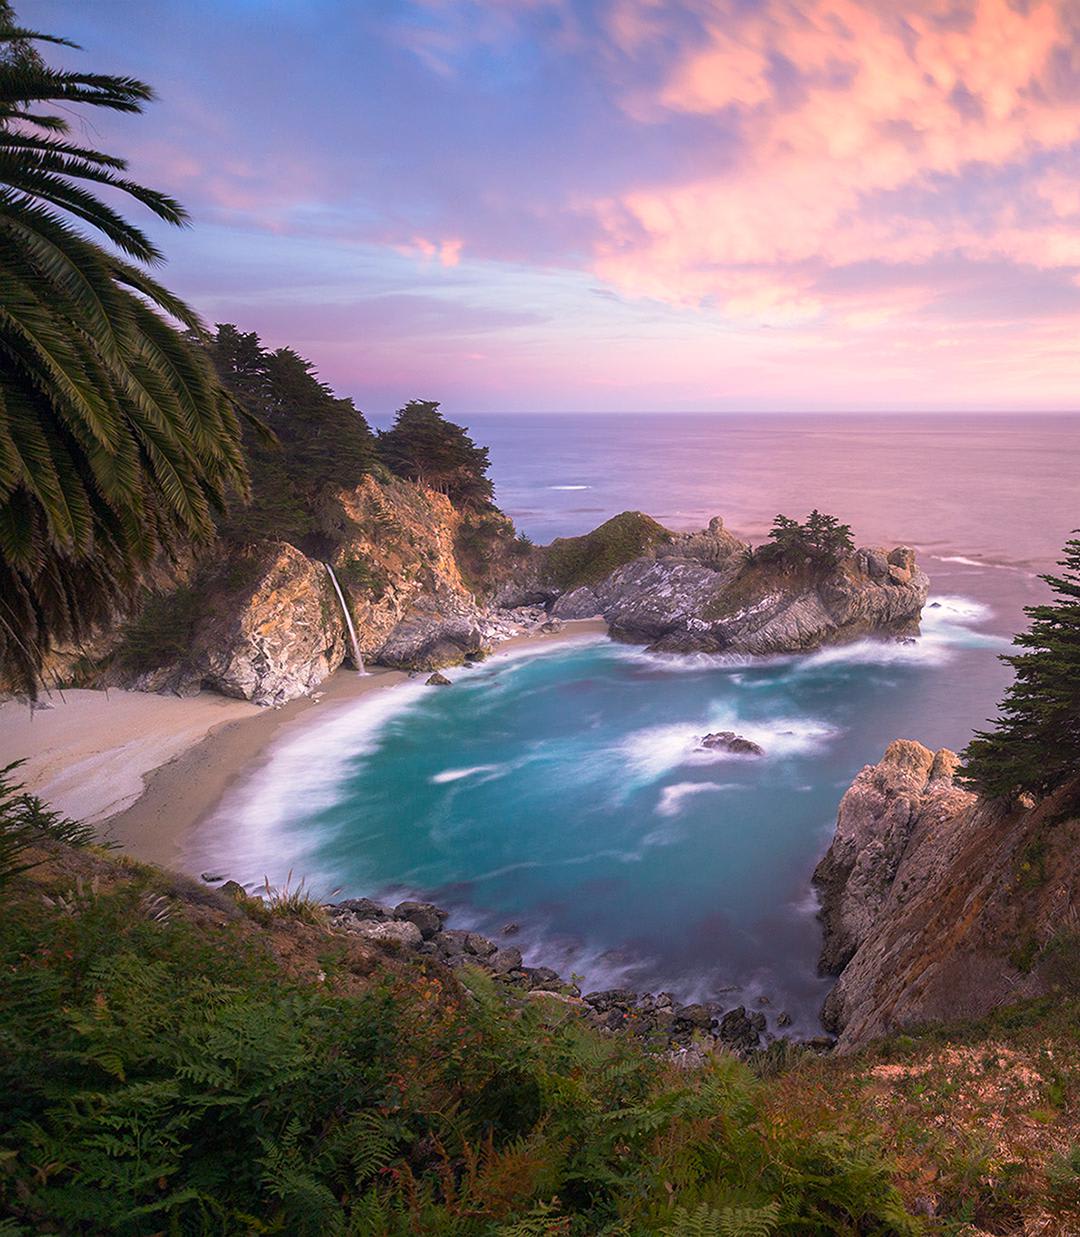 Sunset in Big Sur, California. @marccograssiphotography